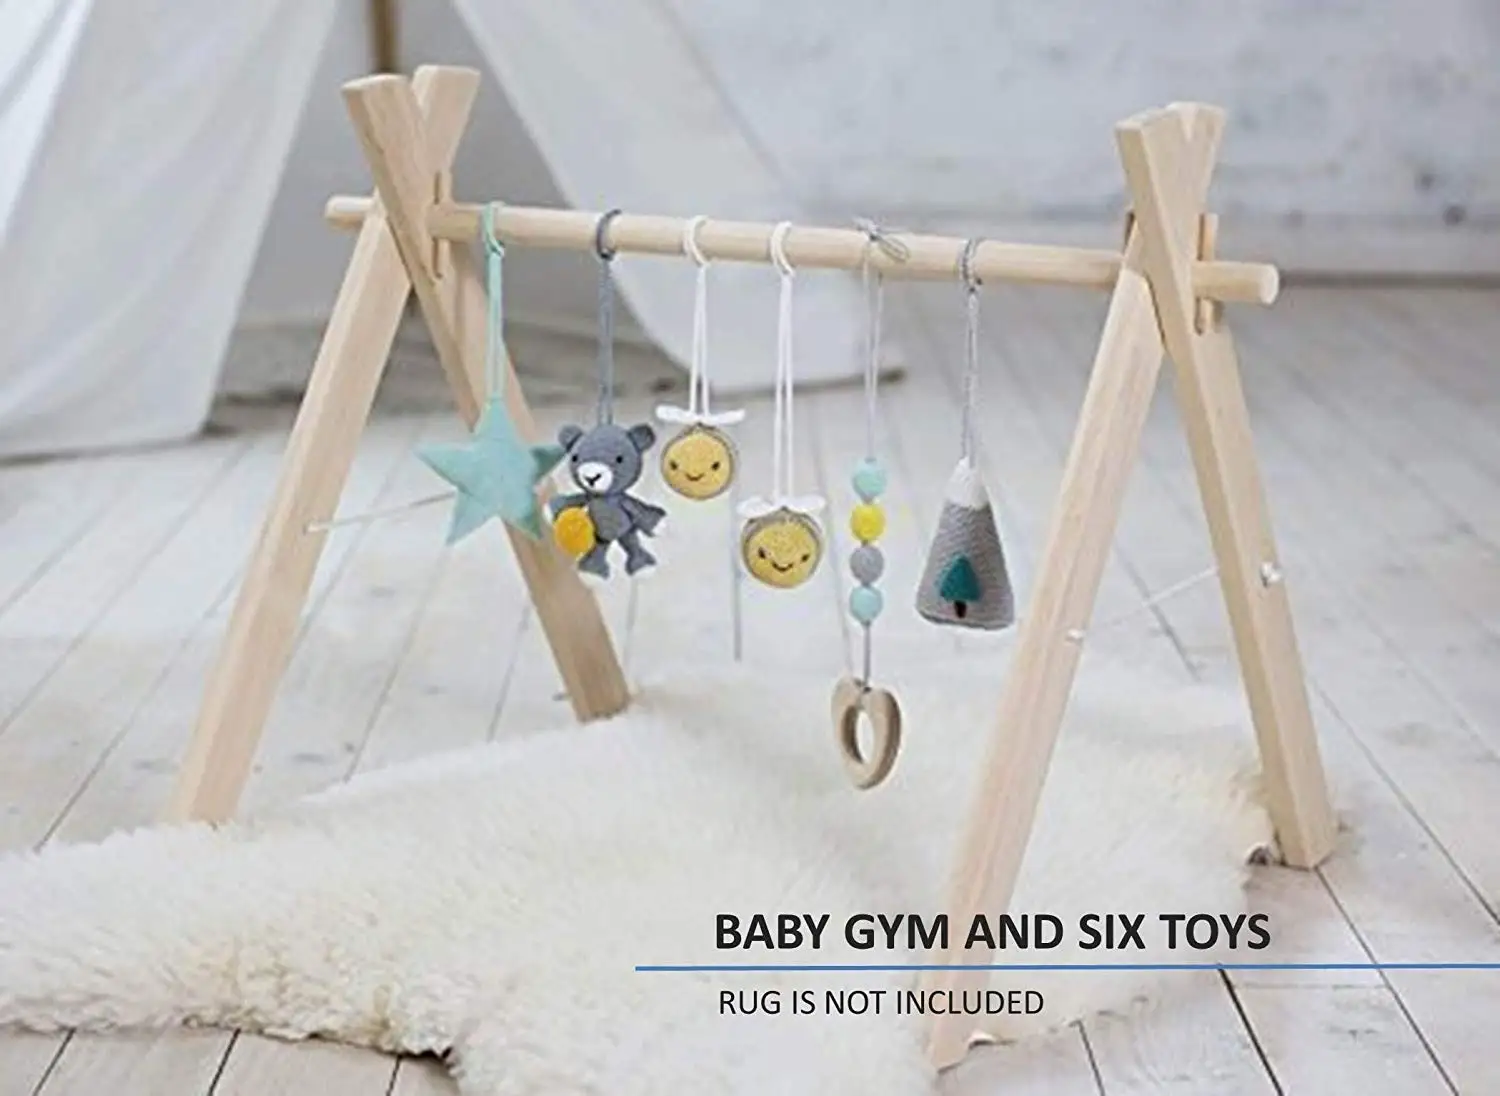 wooden activity center play gym